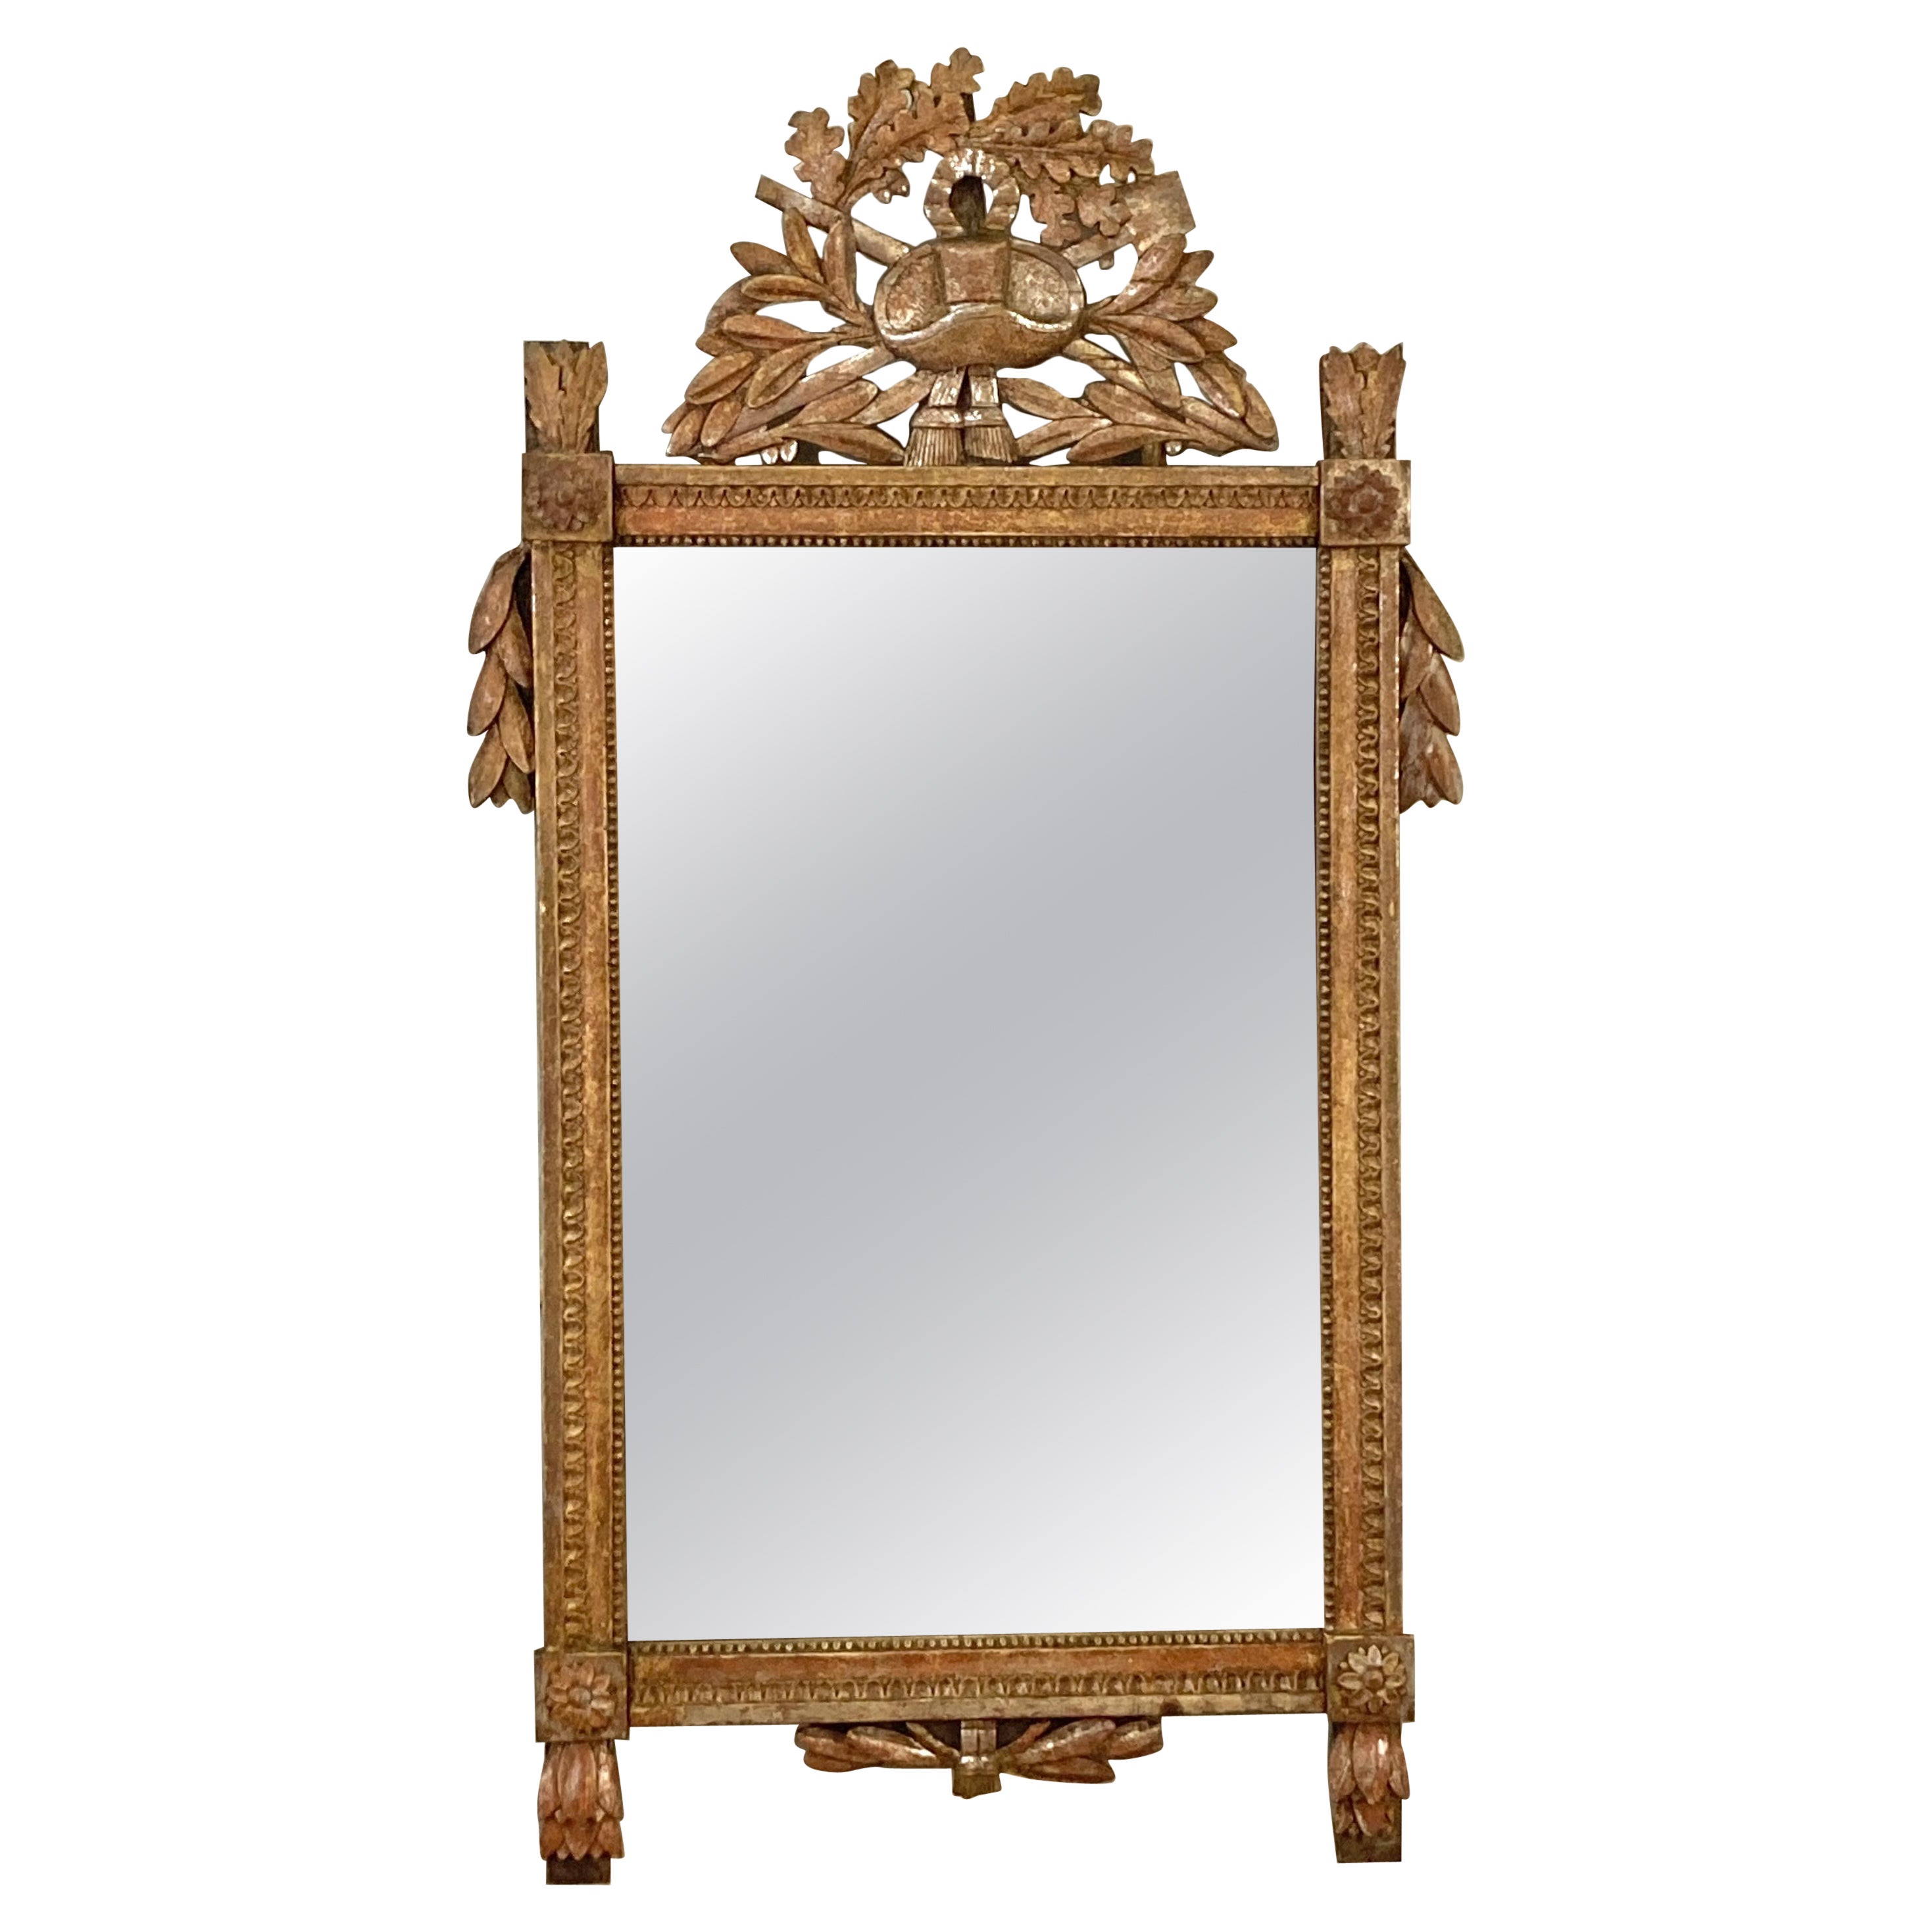 French 1790s Louis XVI Giltwood Wall Mirror with Carved Gardening Crest For Sale